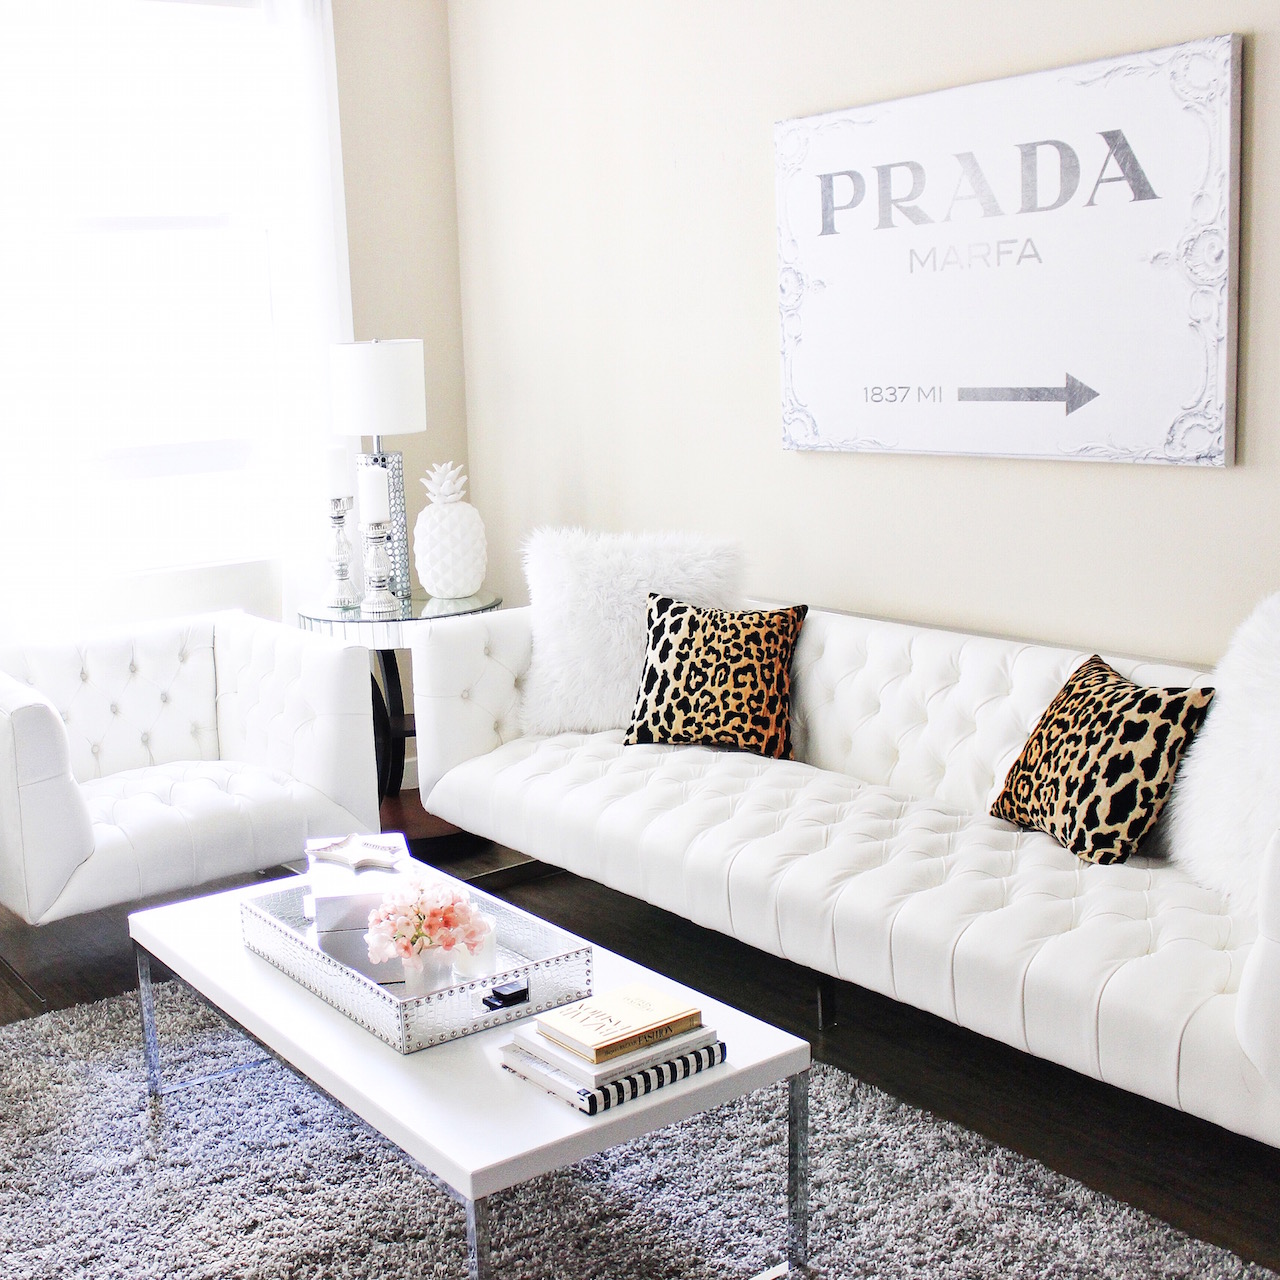 White Tuffed Couch | Leopard Pillows | Prada Canvas | White Living Room | StyledByBlondie.com